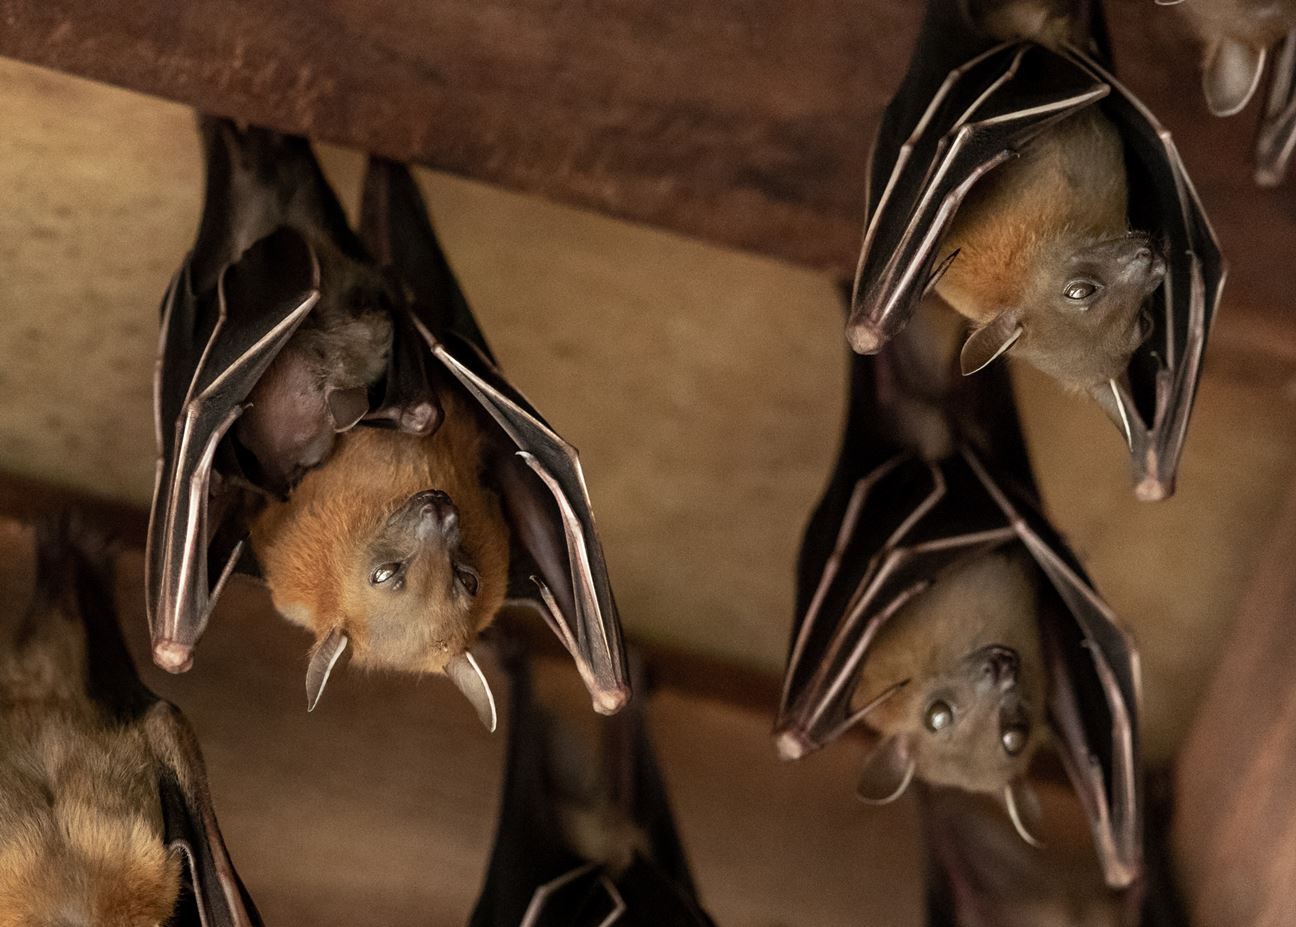 A group of brown bats hanging upside down from a wooden ceiling